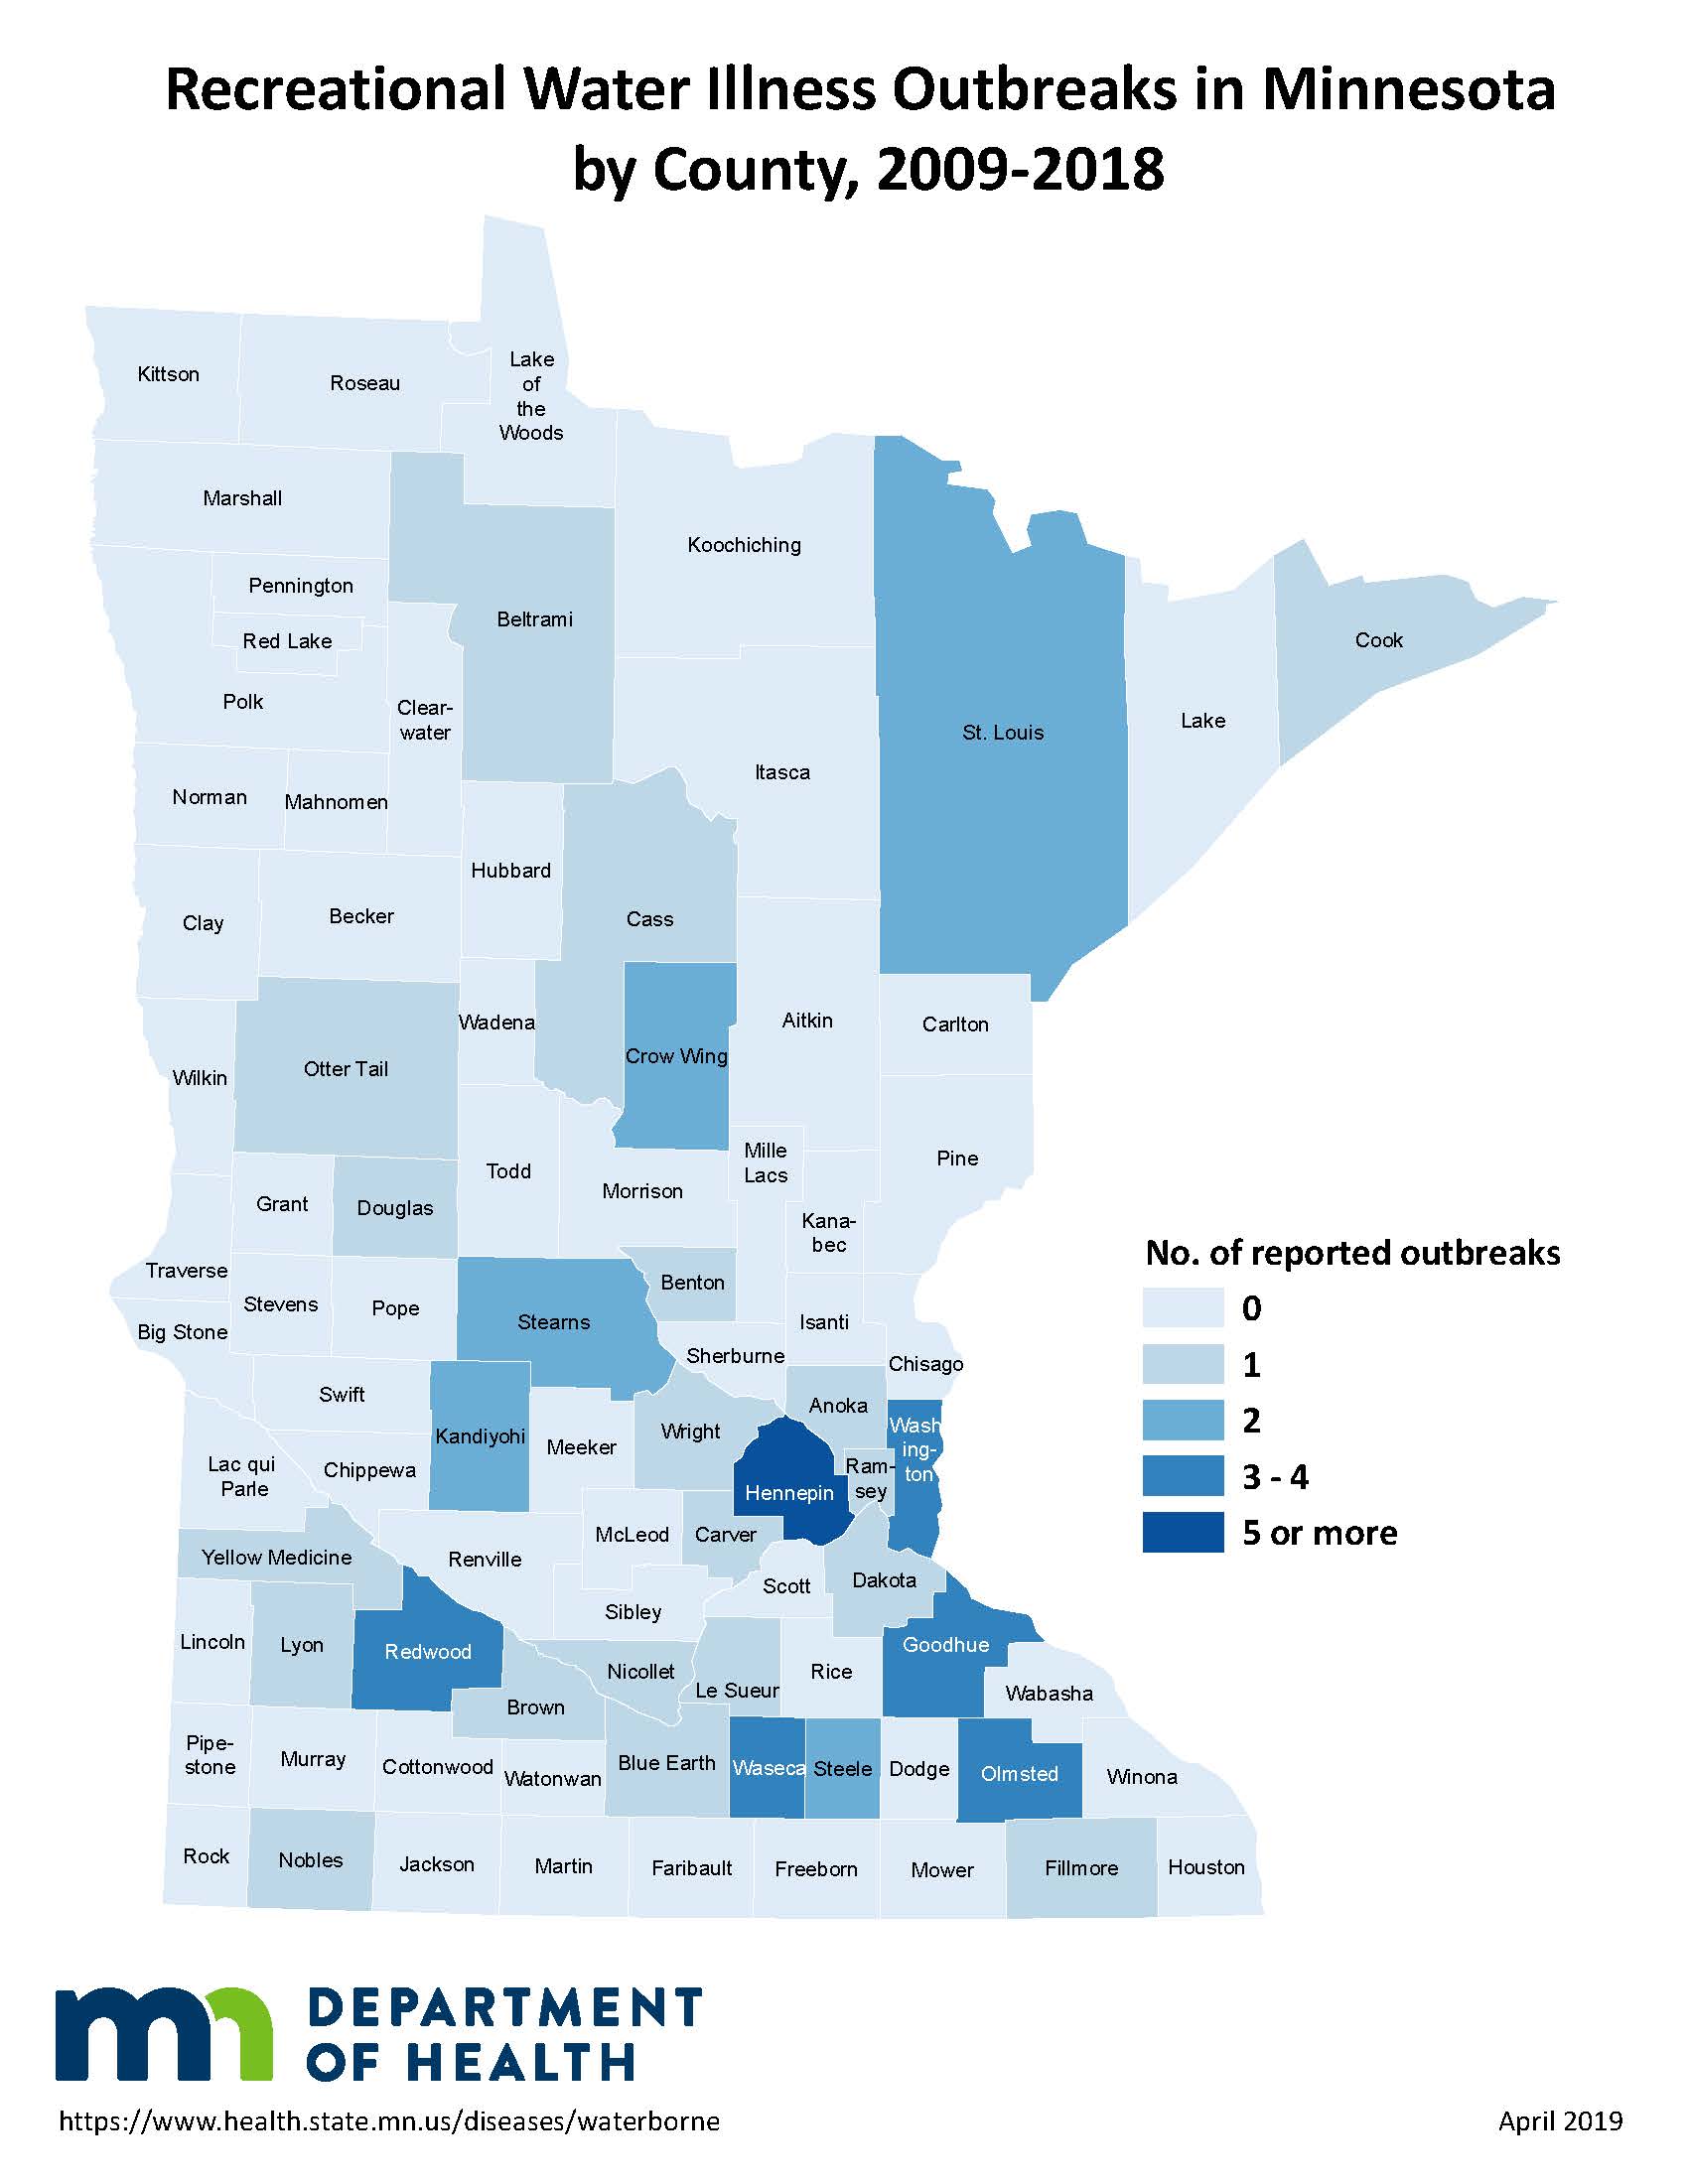 The incidence of recreational water illness outbreaks in Minnesota by County, 2009-2018